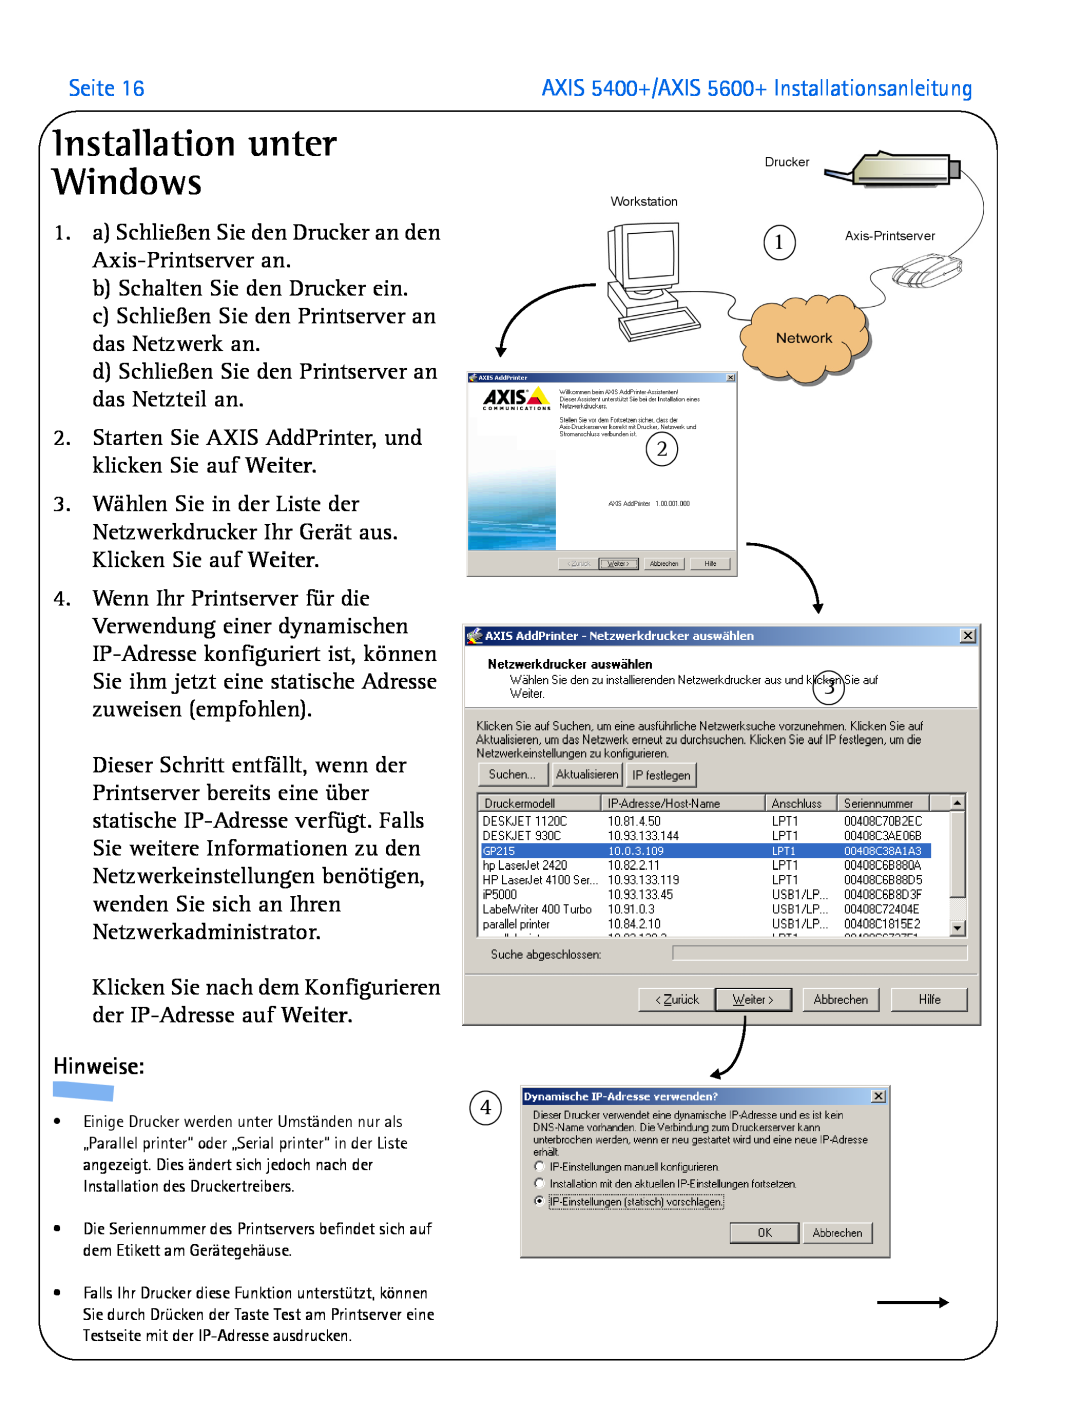 Axis Communications manual Installation unter Windows, Seite, Hinweise, AXIS 5400+/AXIS 5600+ Installationsanleitung 